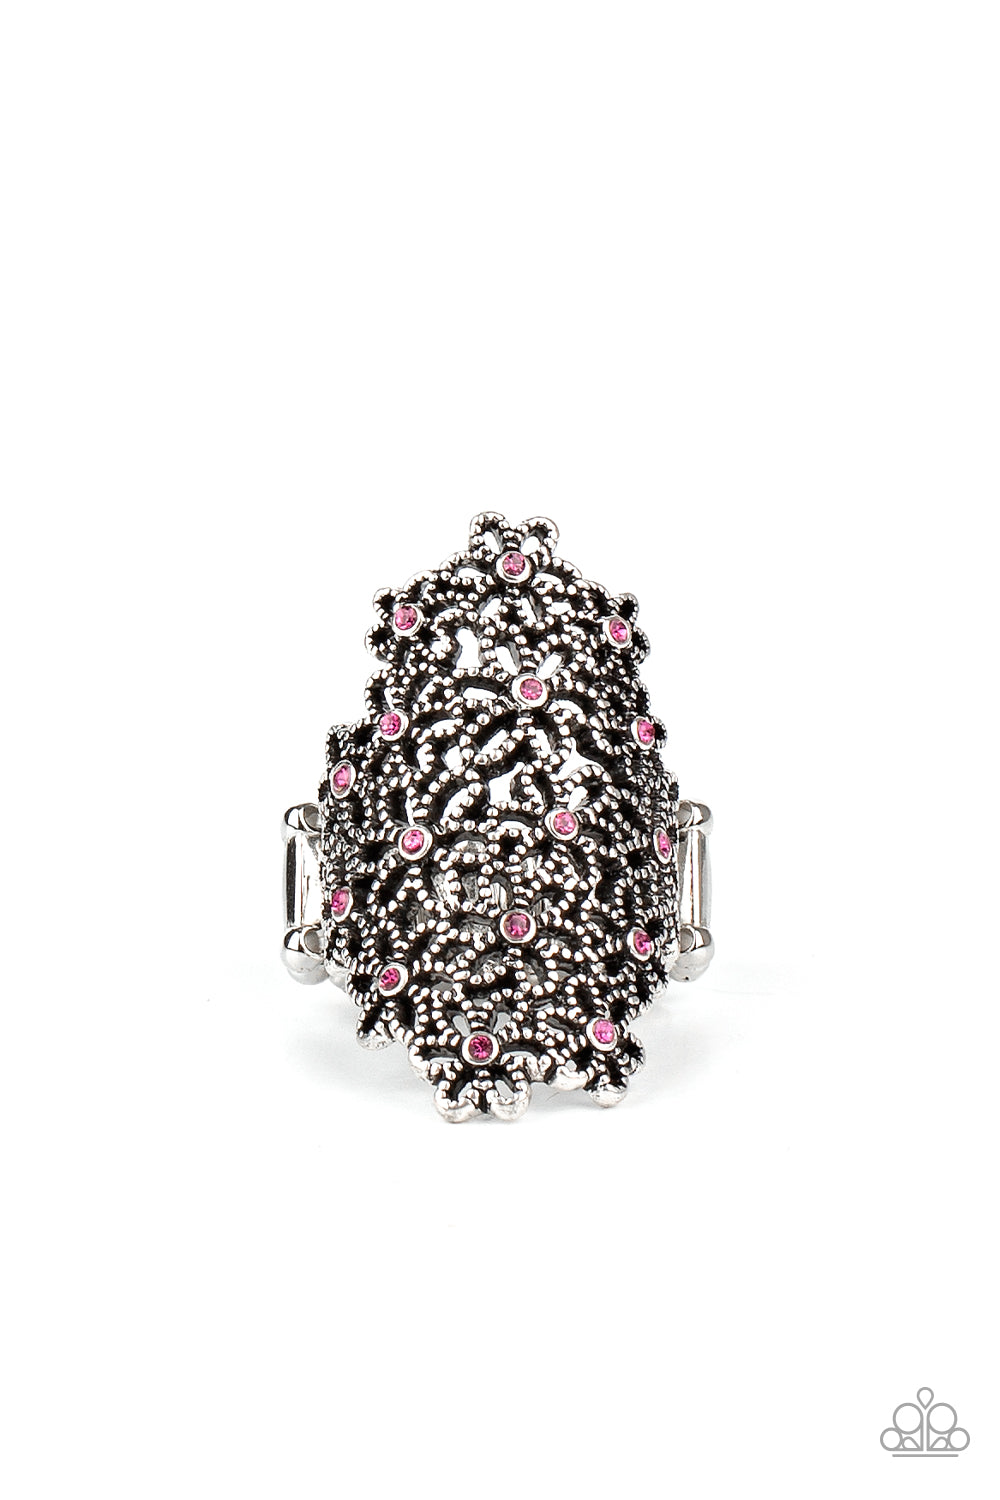 &lt;P&gt; Dotted with dainty pink rhinestone centers, a bouquet of silver flowers blooms across the finger for a seasonally whimsical look. Features a stretchy band for a flexible fit.&lt;/P&gt;  

&lt;P&gt; &lt;I&gt;  Sold as one individual ring.
&lt;/I&gt;&lt;/P&gt;

&lt;img src=\&quot;https://d9b54x484lq62.cloudfront.net/paparazzi/shopping/images/517_tag150x115_1.png\&quot; alt=\&quot;New Kit\&quot; align=\&quot;middle\&quot; height=\&quot;50\&quot; width=\&quot;50\&quot;/&gt;